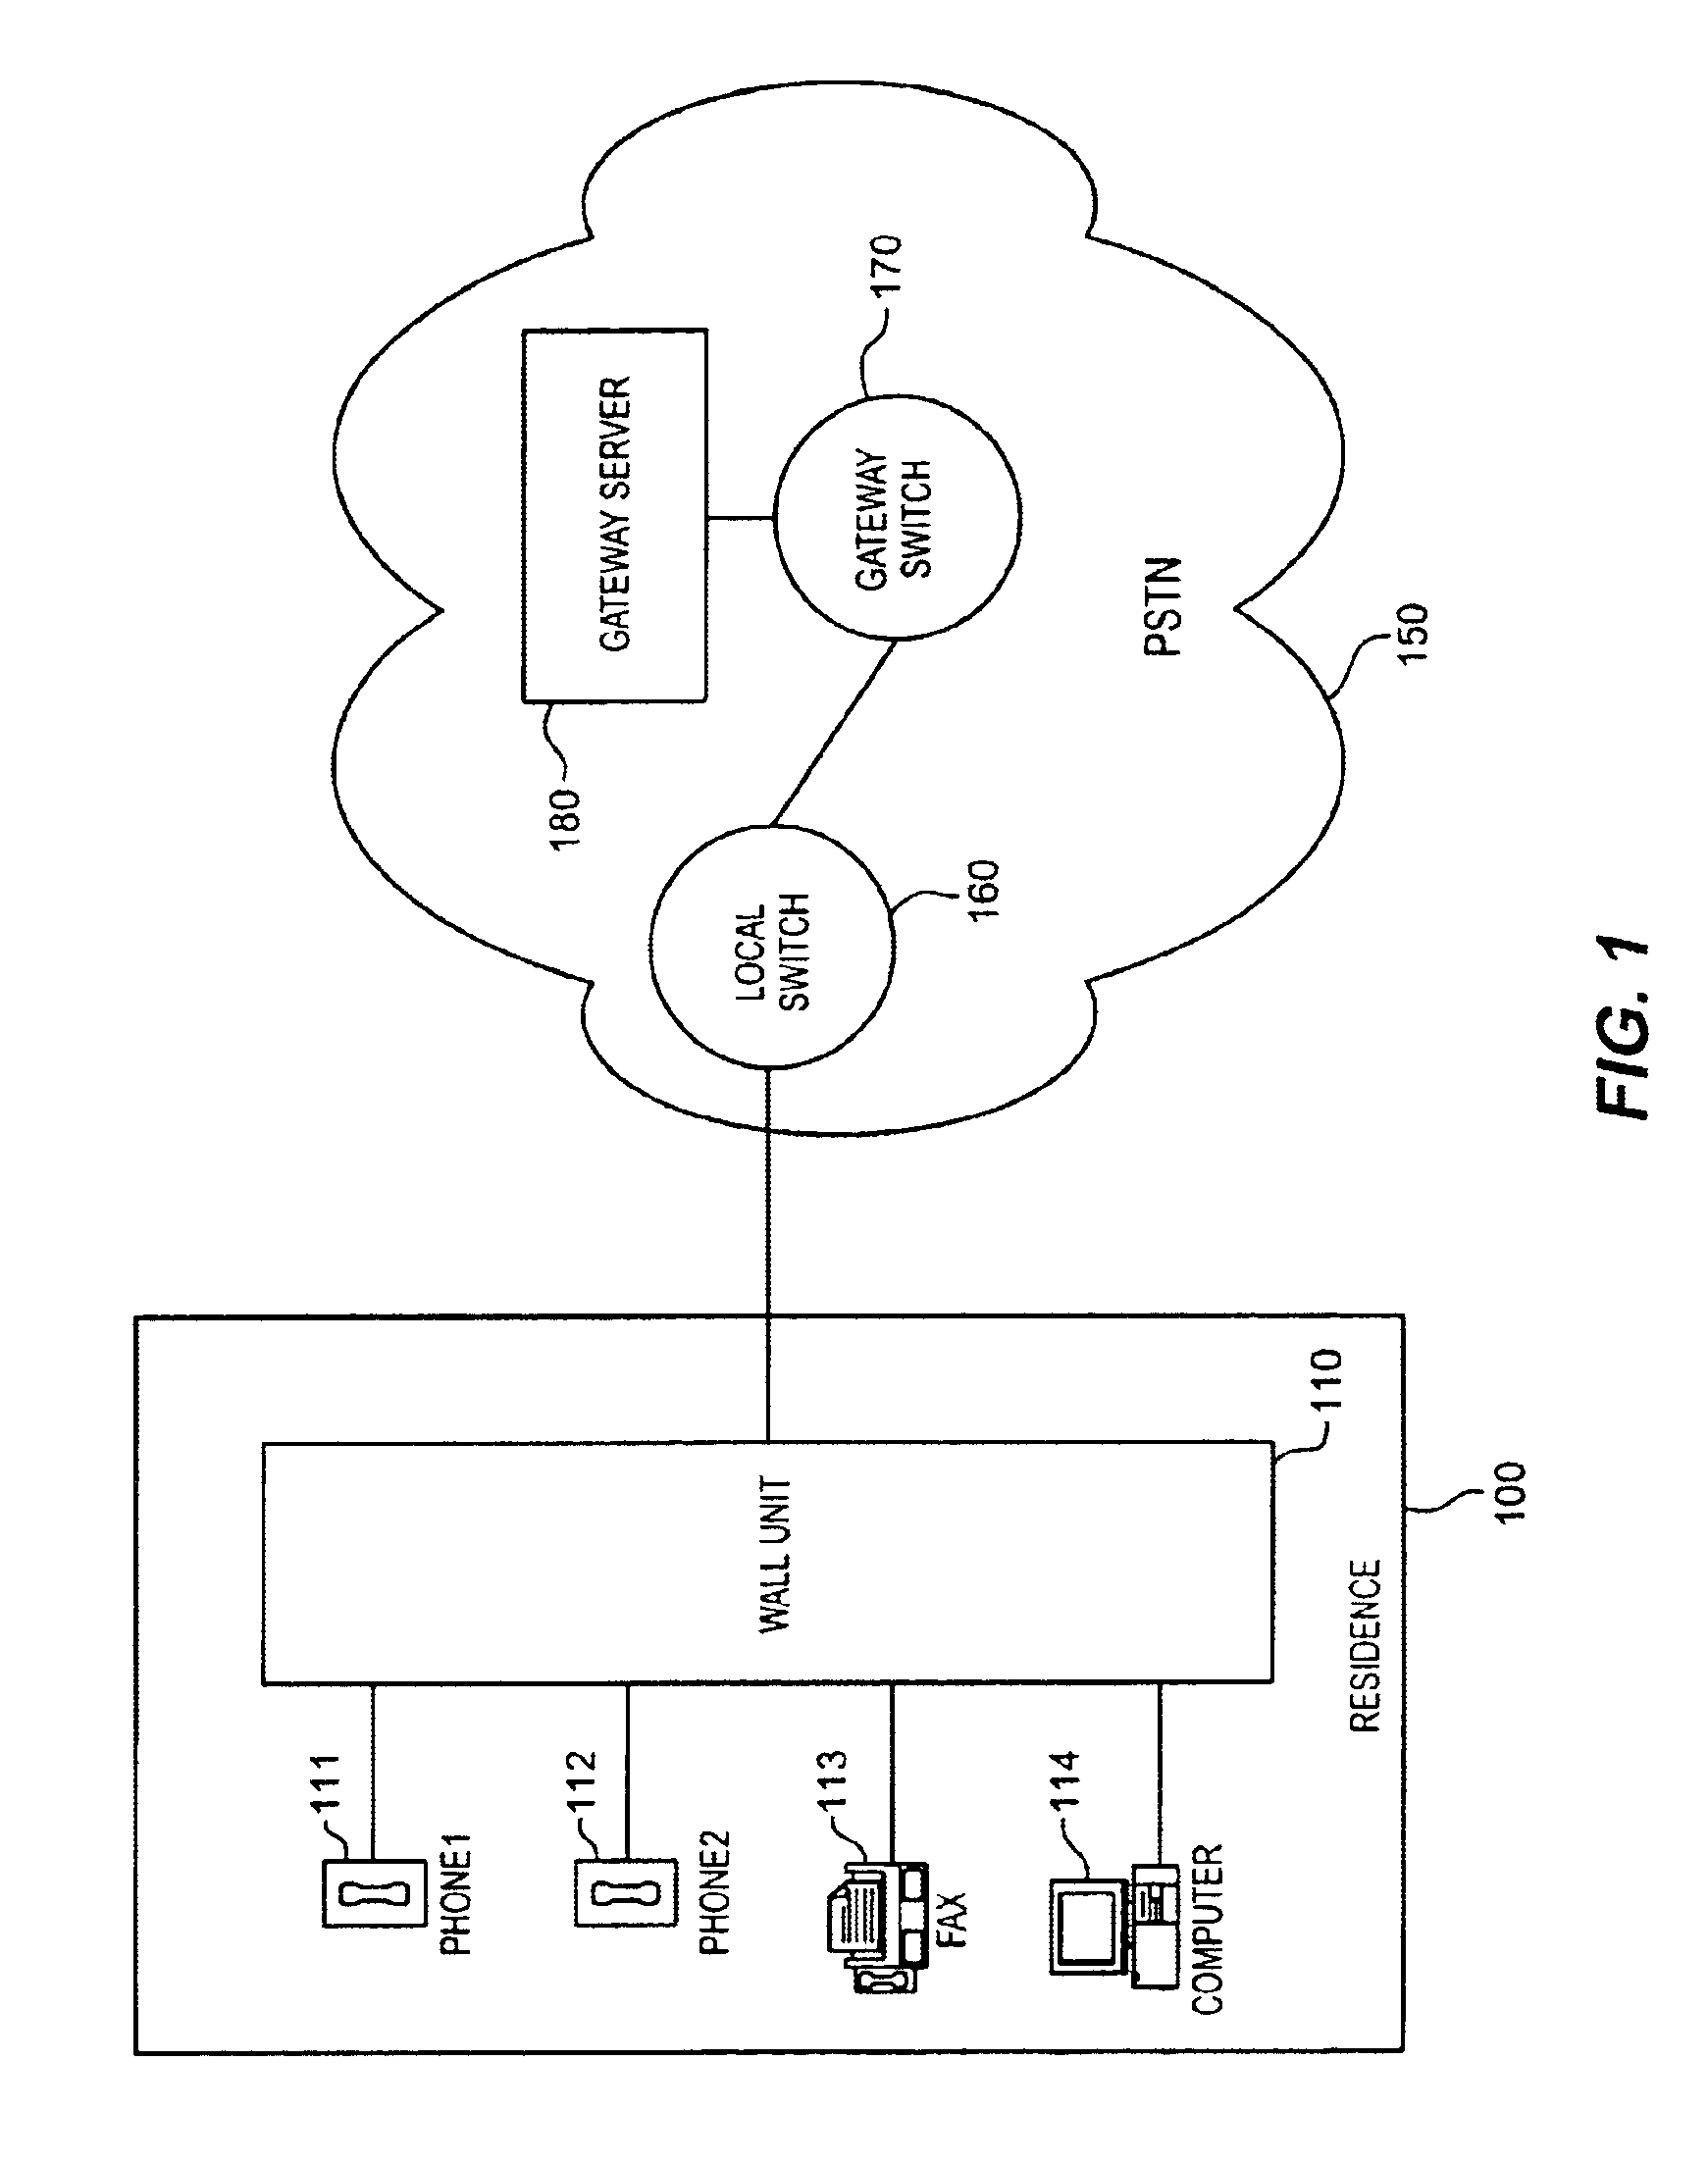 Method and apparatus for simultaneous multiline phone and data services over a single access facility